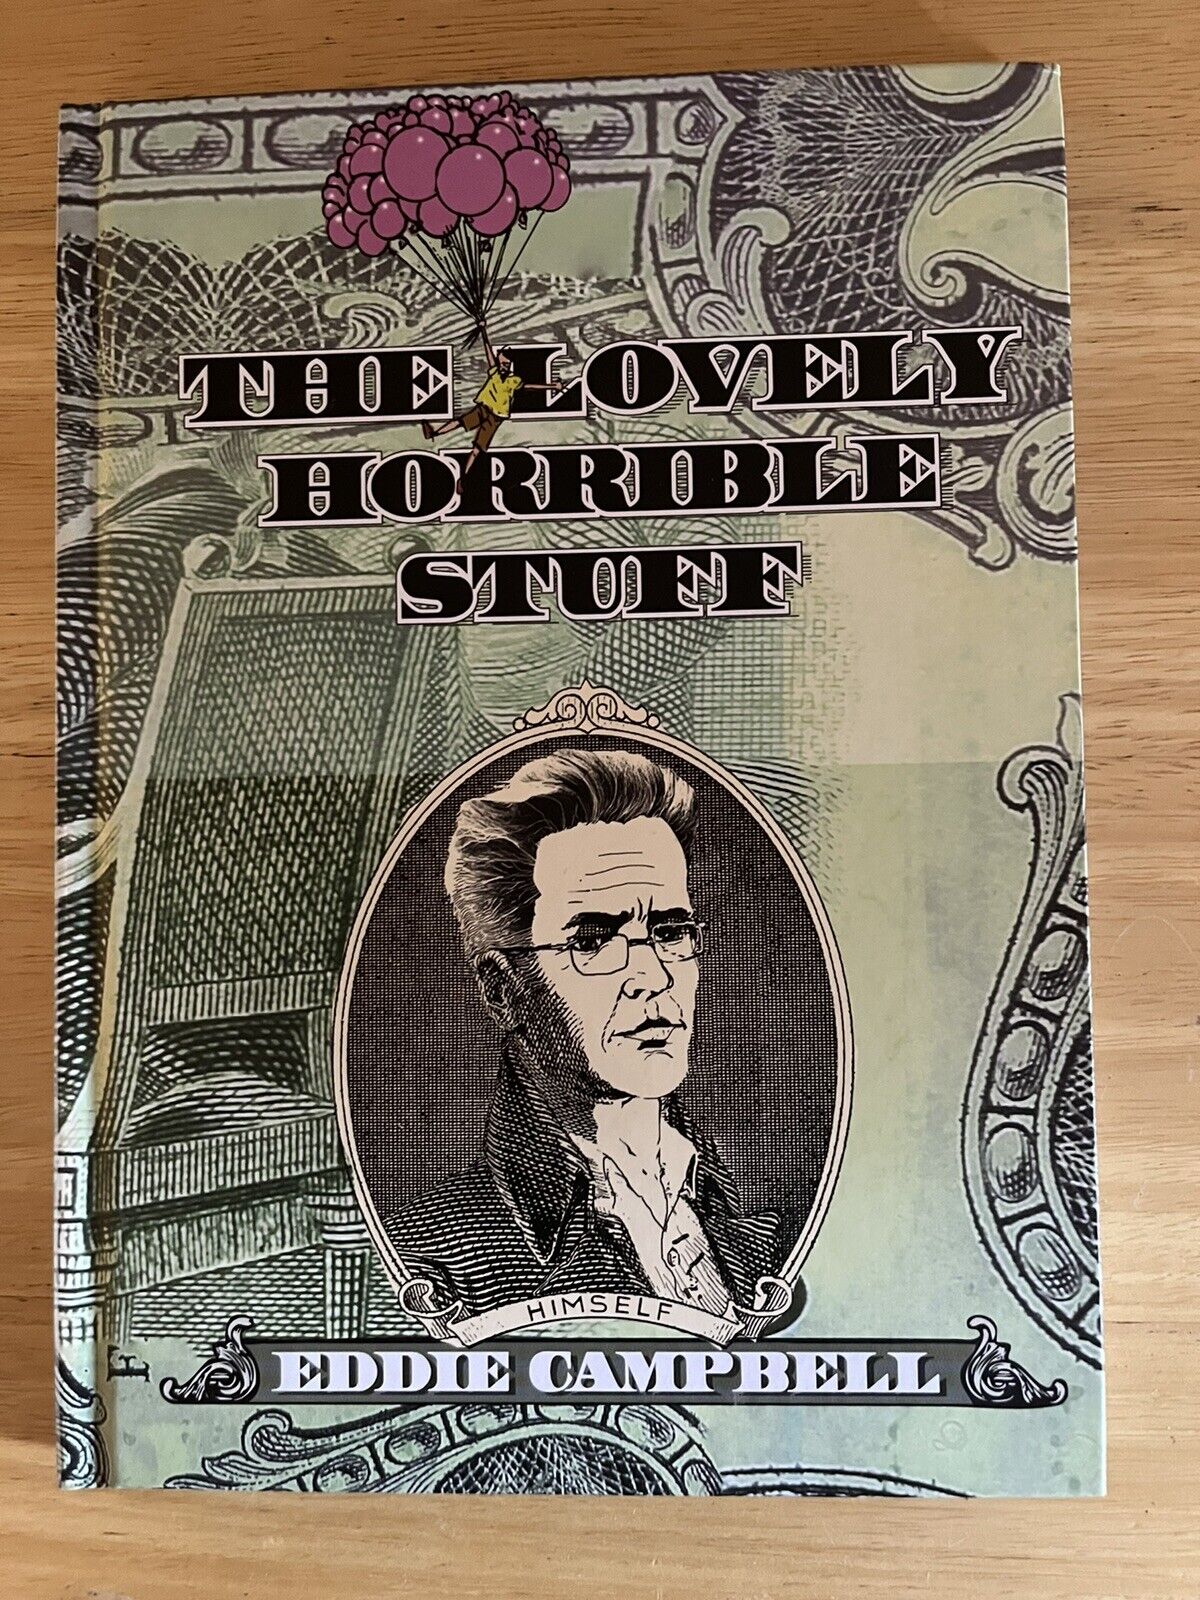 The Lovely Horrible Stuff Top Shelf Hardcover  by Eddie Campbell 2012 1st print